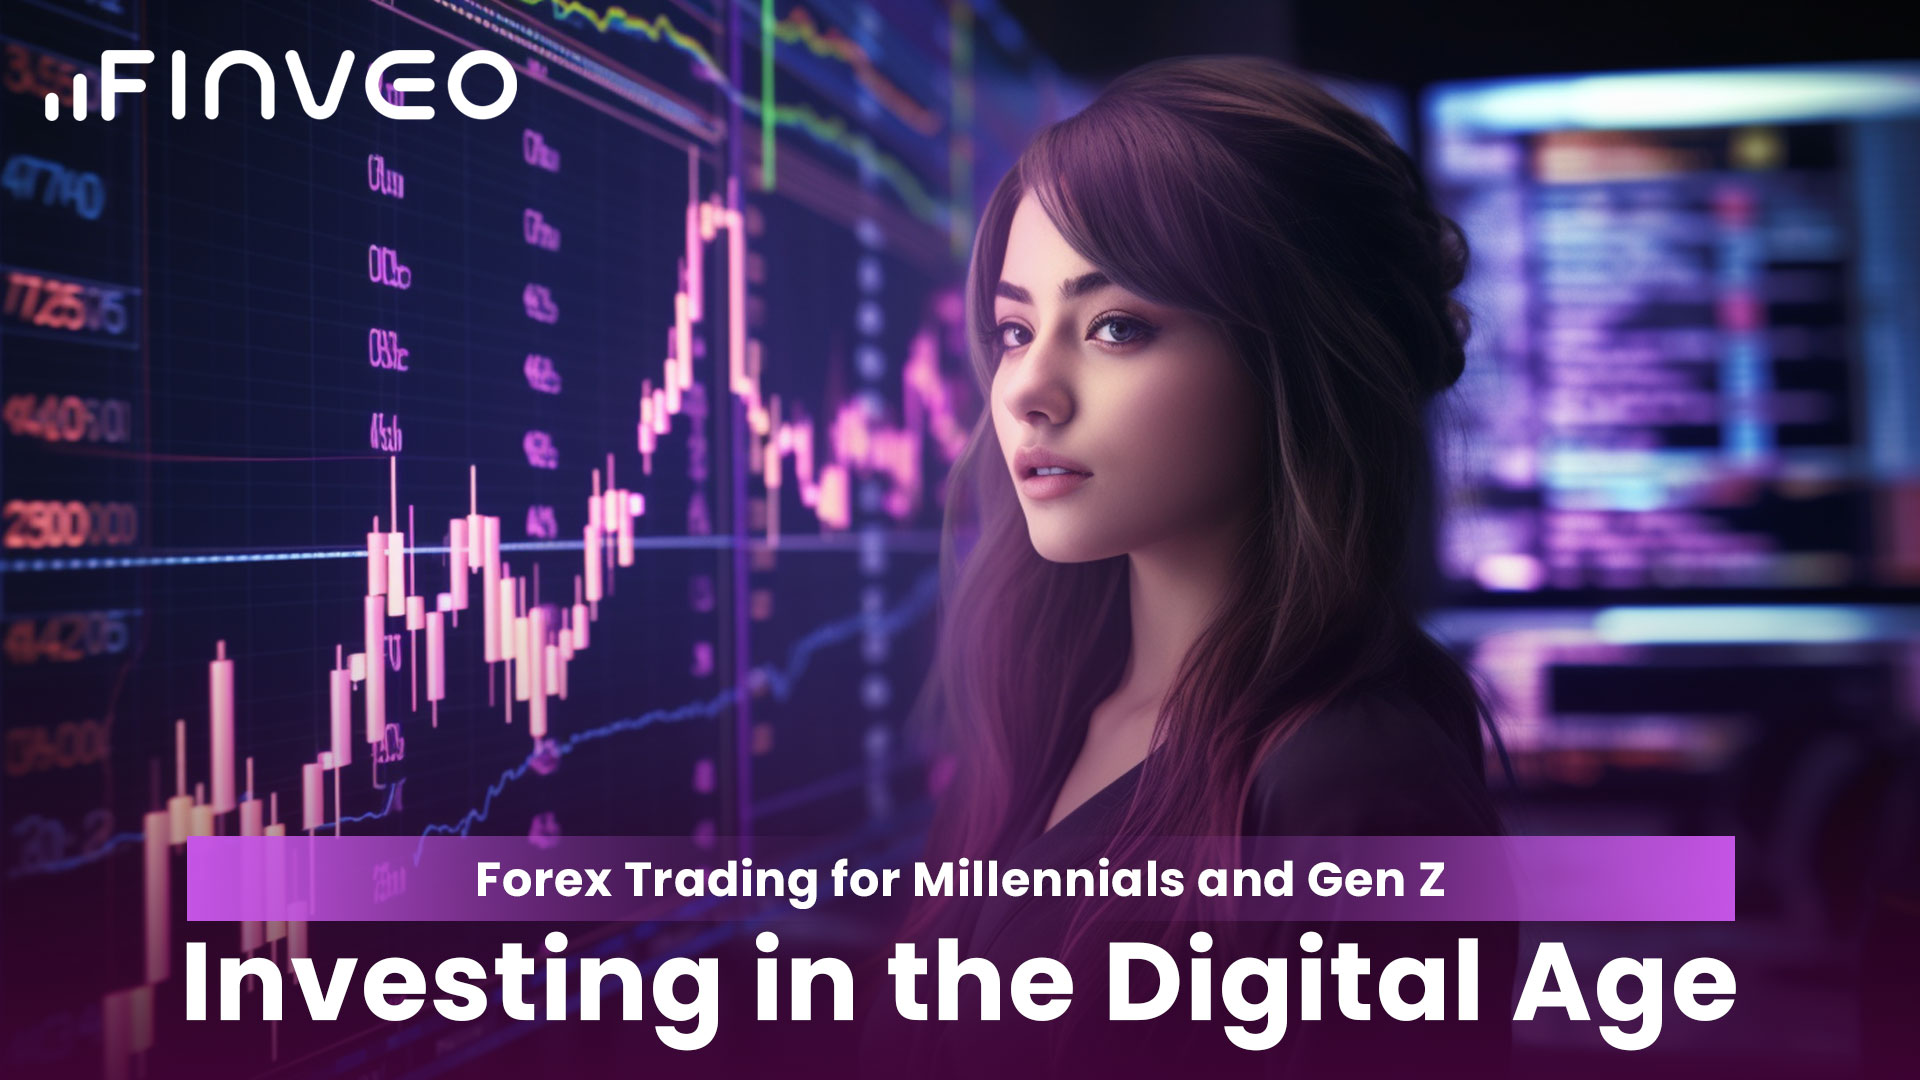 Forex Trading for Millennials and Gen Z: Investing in the Digital Age